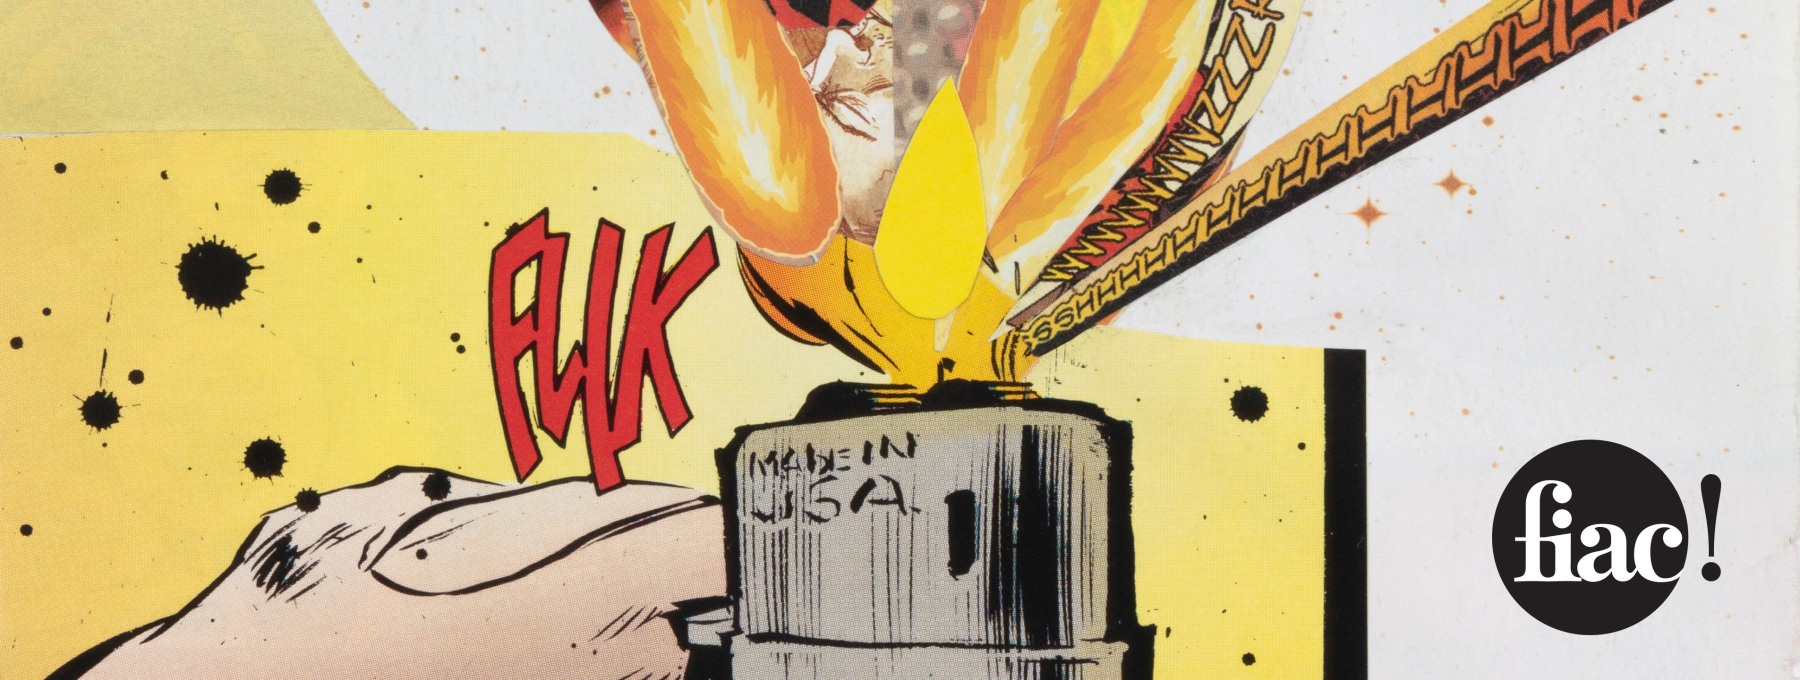 Detail of Christian Marclay's collage titled Flik, showing a thumb on a lighter with graphic text